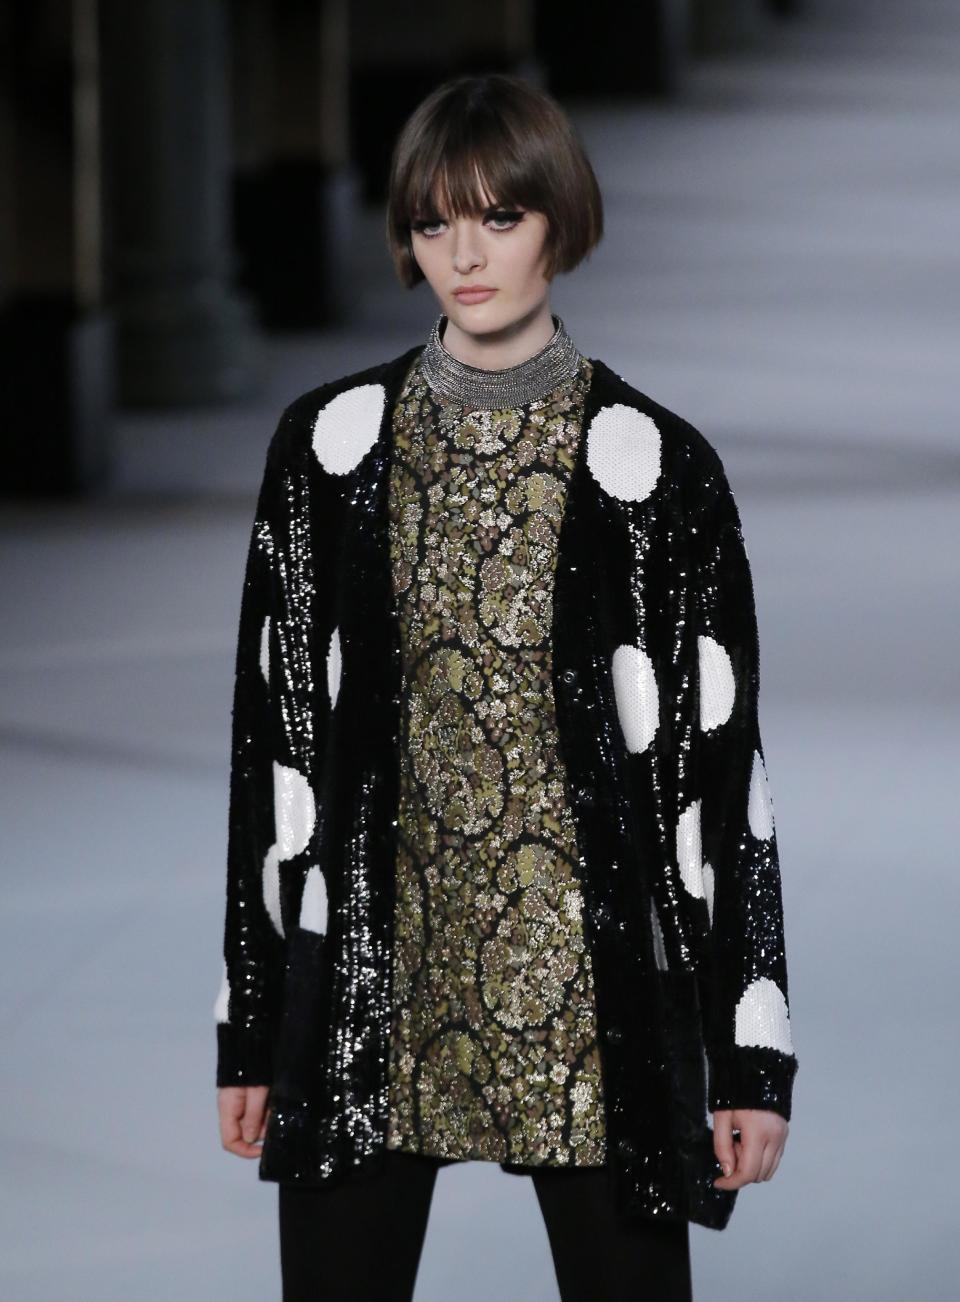 A model wears creations by French fashion designer Hedi Slimane for St Laurent ready-to-wear fall/winter 2014-2015 fashion collection presented in Paris, Monday, March 3, 2014. (AP Photo/Michel Euler)